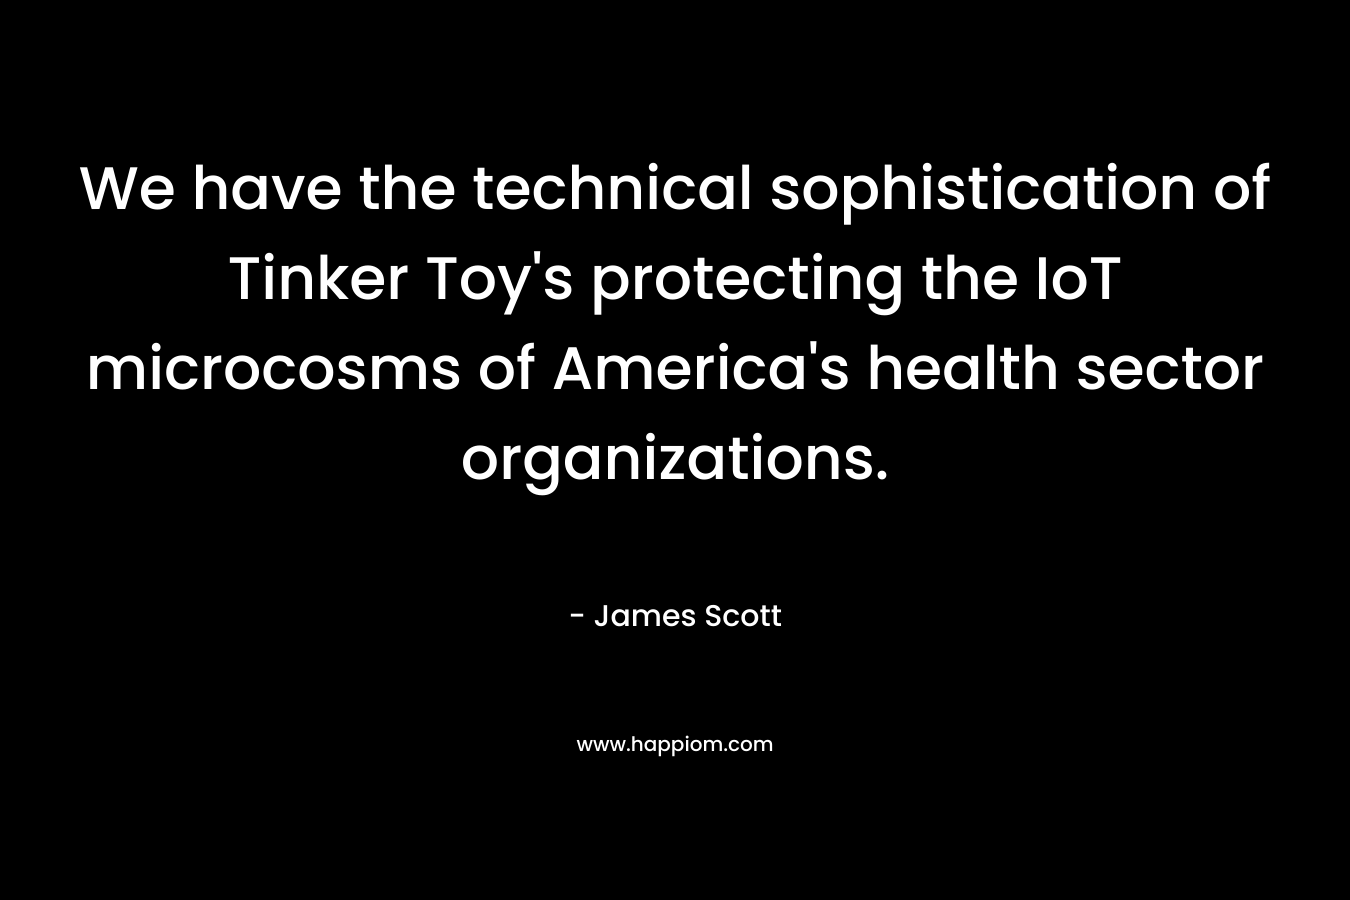 We have the technical sophistication of Tinker Toy’s protecting the IoT microcosms of America’s health sector organizations. – James Scott